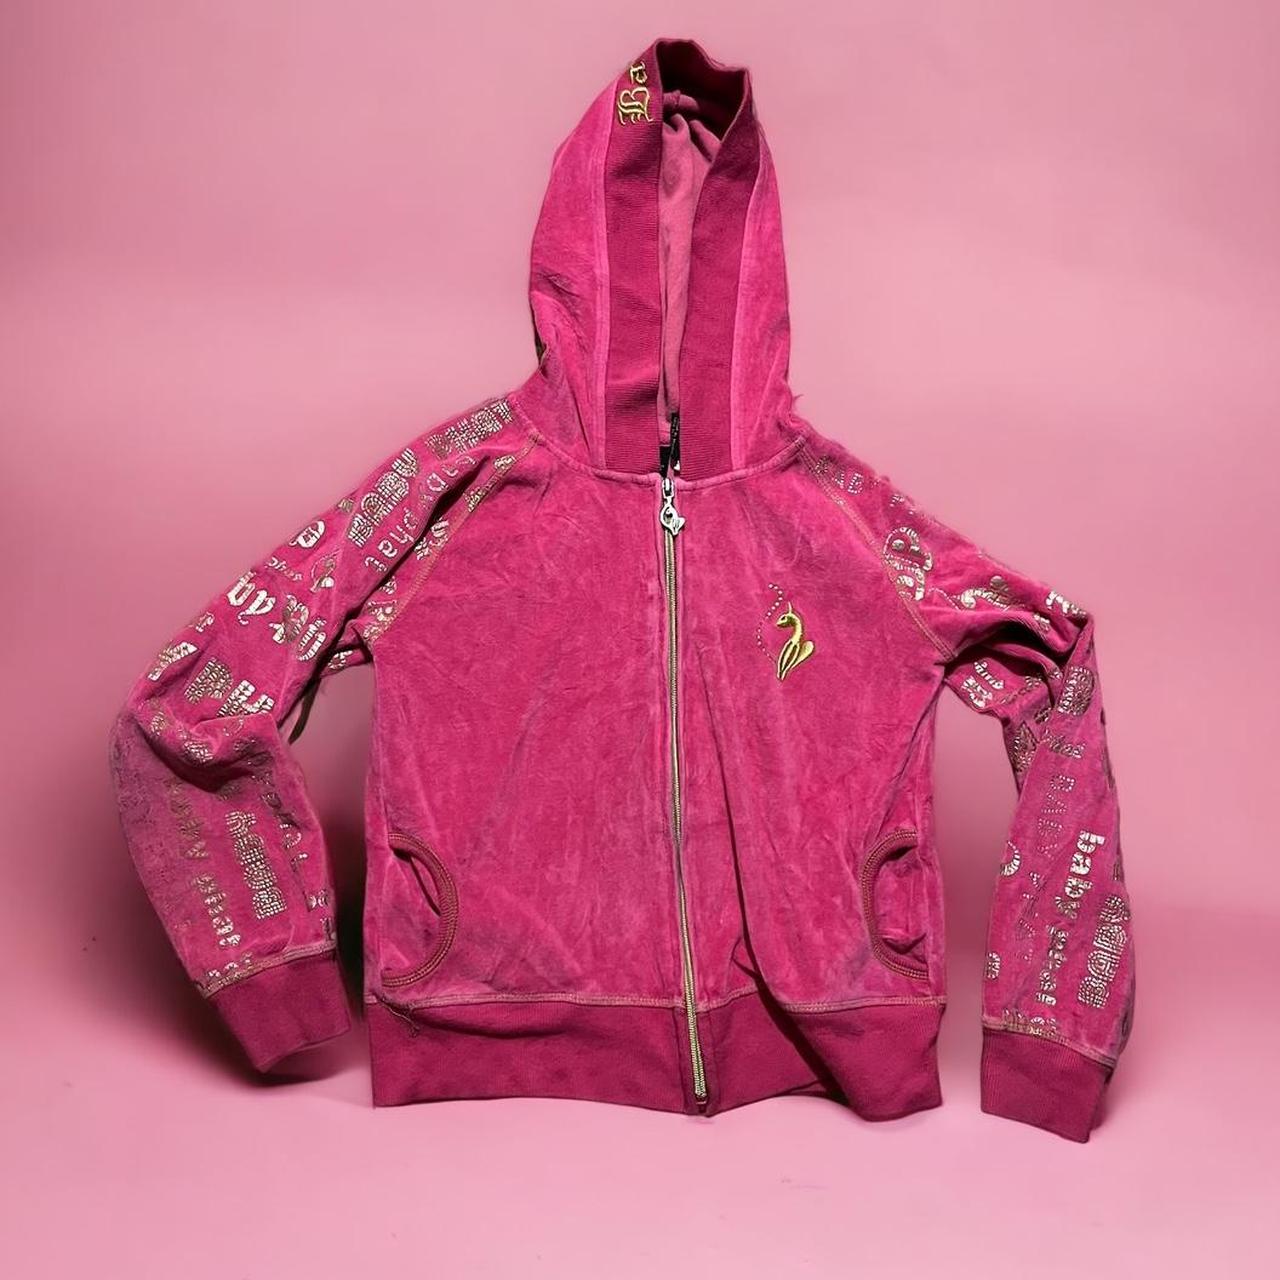 Baby Phat Women's Pink and Gold Jacket | Depop